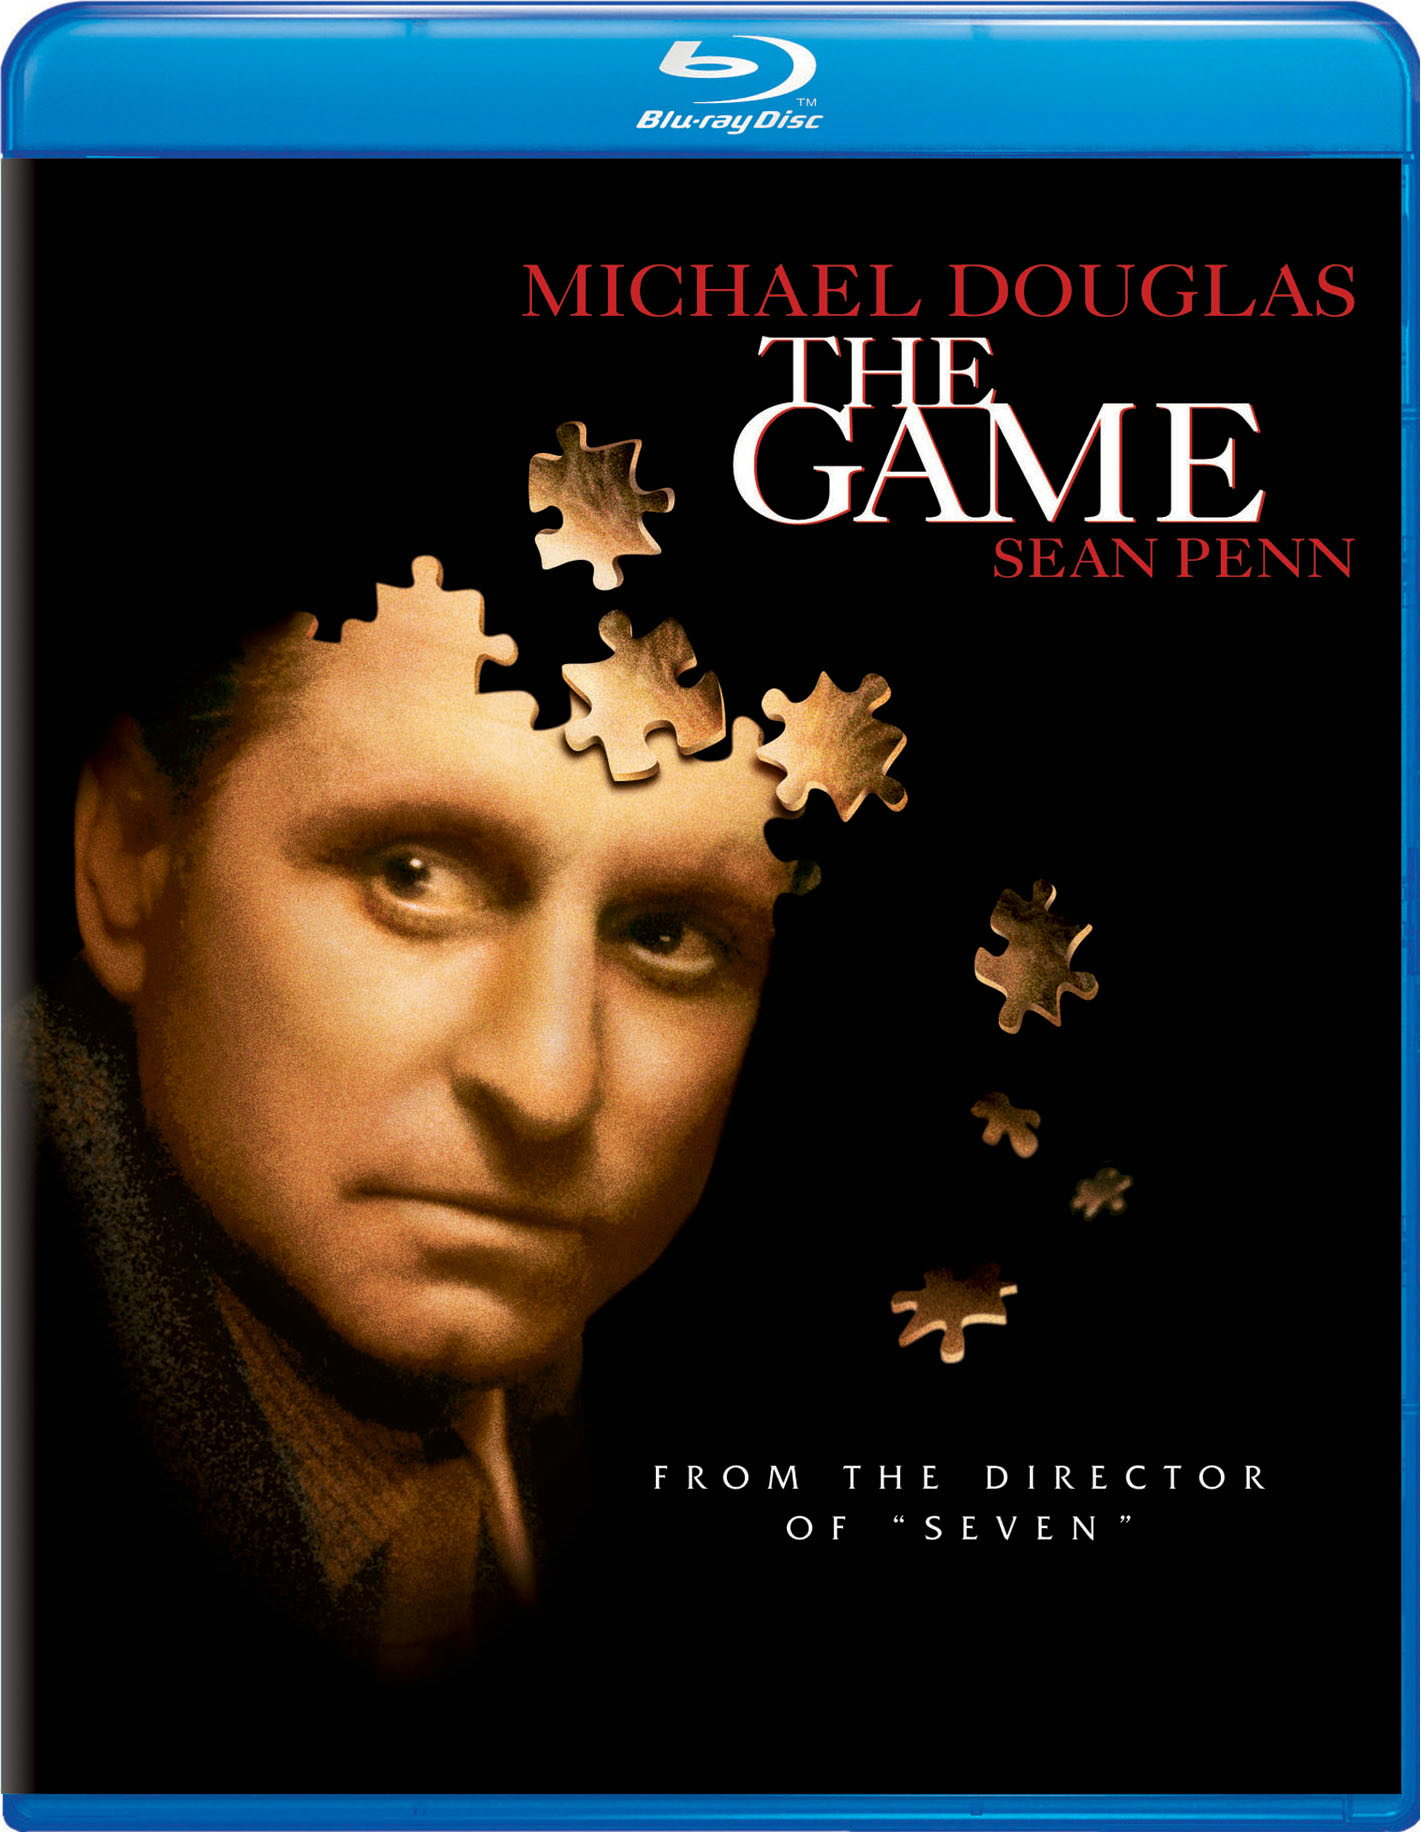 The Game - Blu-ray [ 1997 ]  - Thriller Movies On Blu-ray - Movies On GRUV